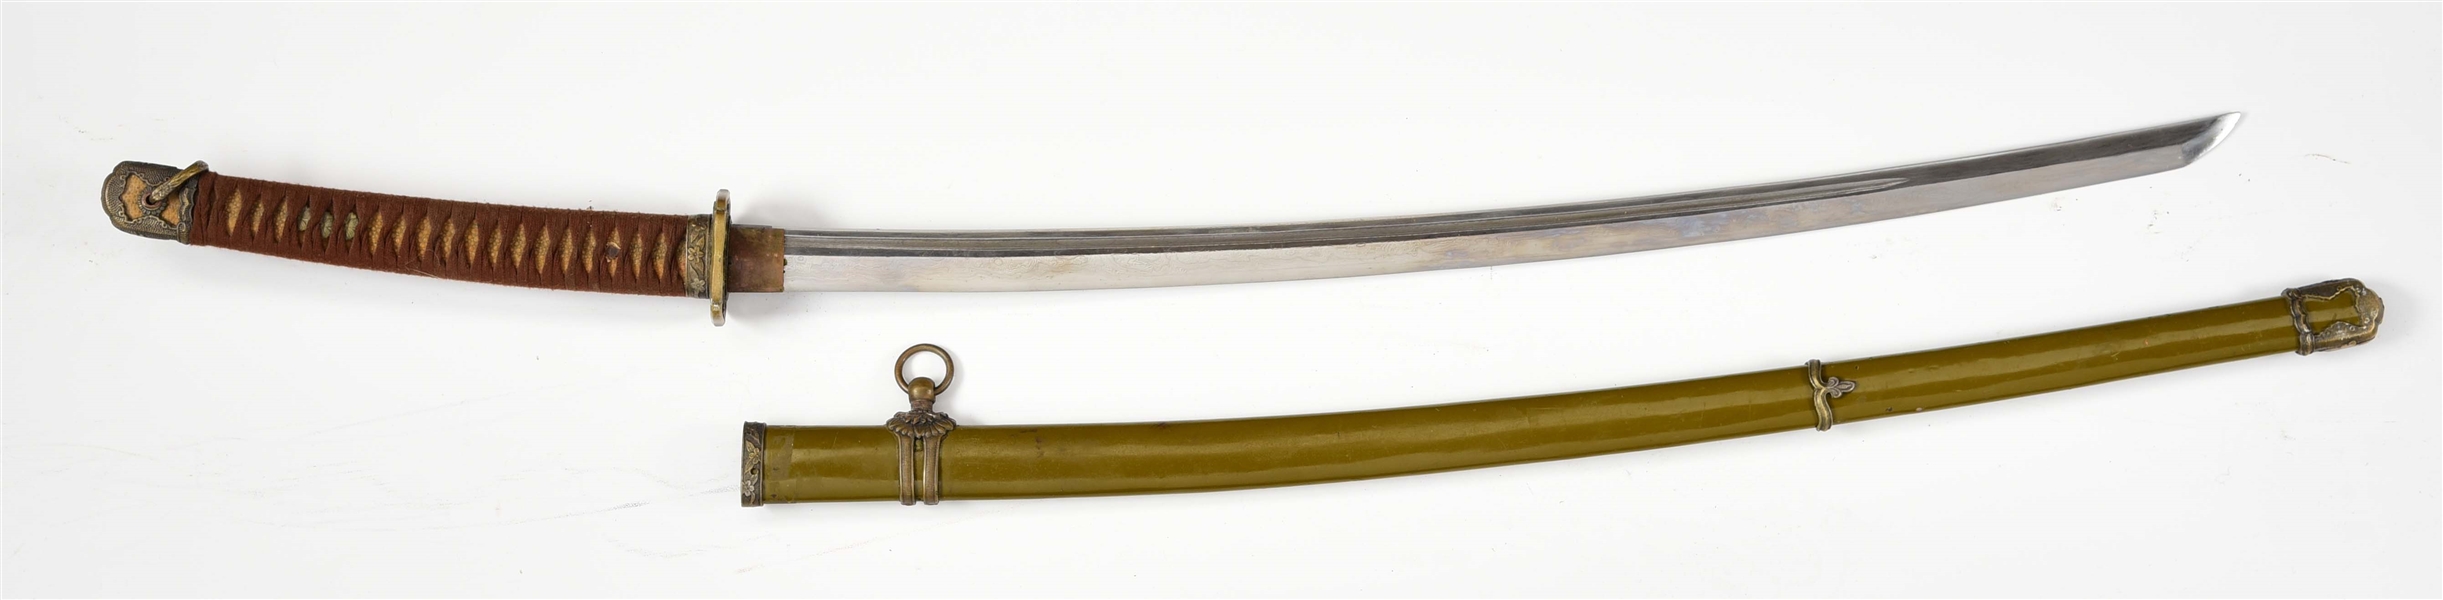 REPRODUCTION OF A WORLD WAR II JAPANESE SWORD. 